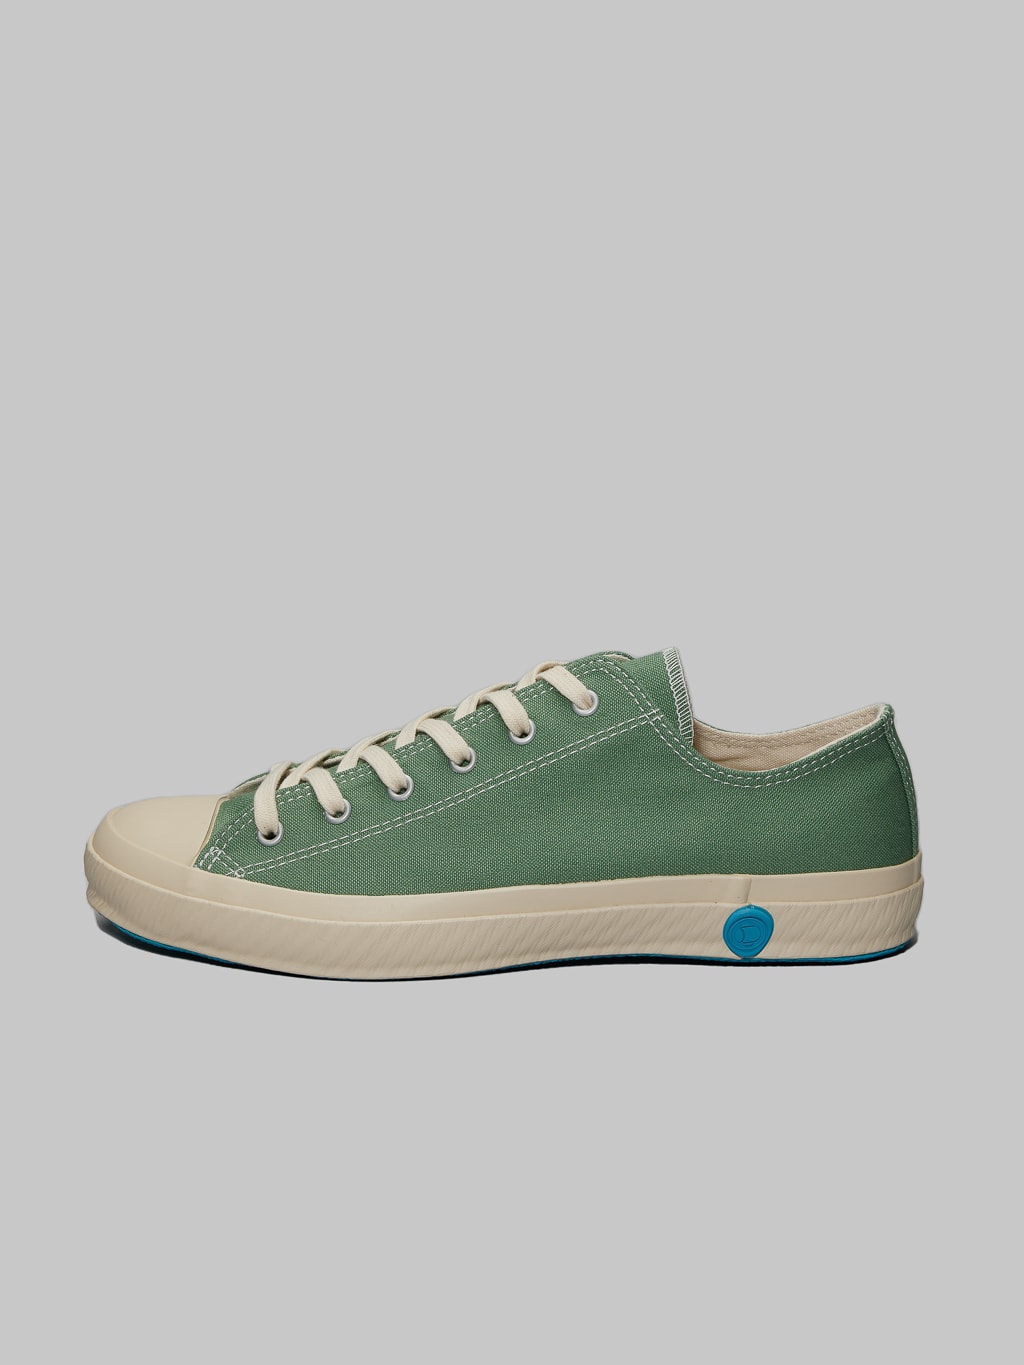 Shoes like pottery low sneaker green made in japan